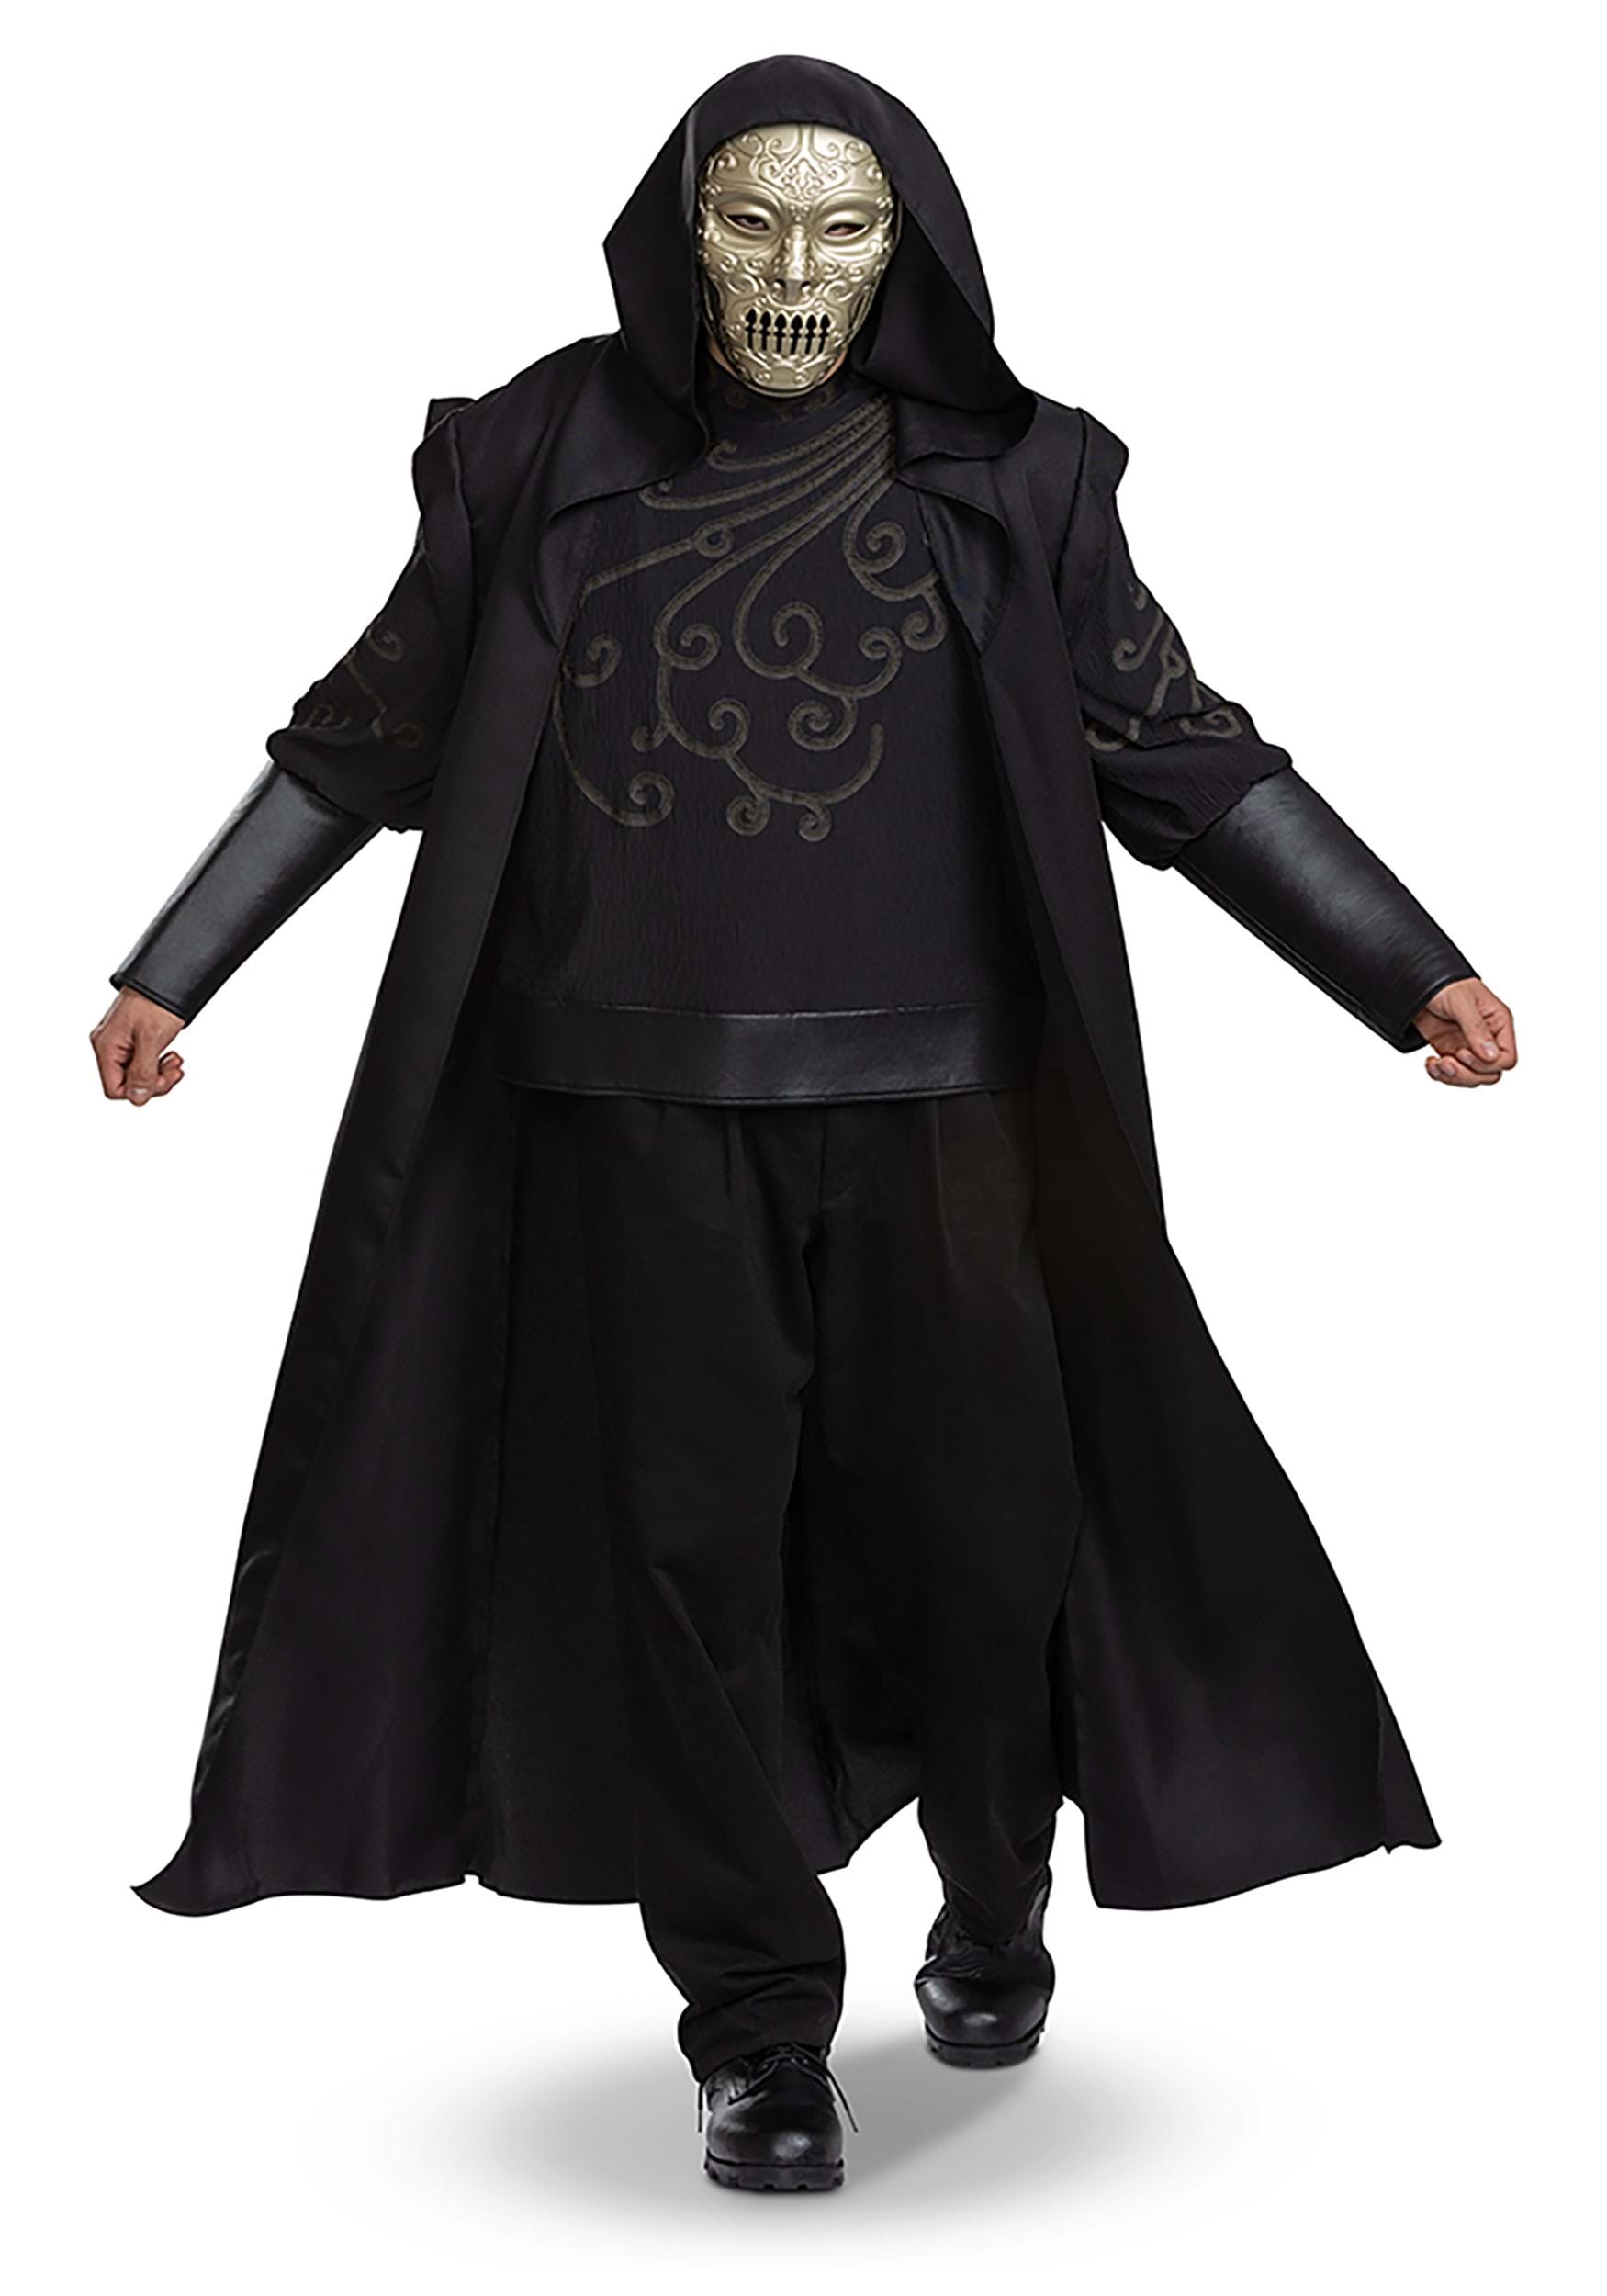 Image of Harry Potter Deluxe Death Eater Costume for Adults ID DI148589-S/M